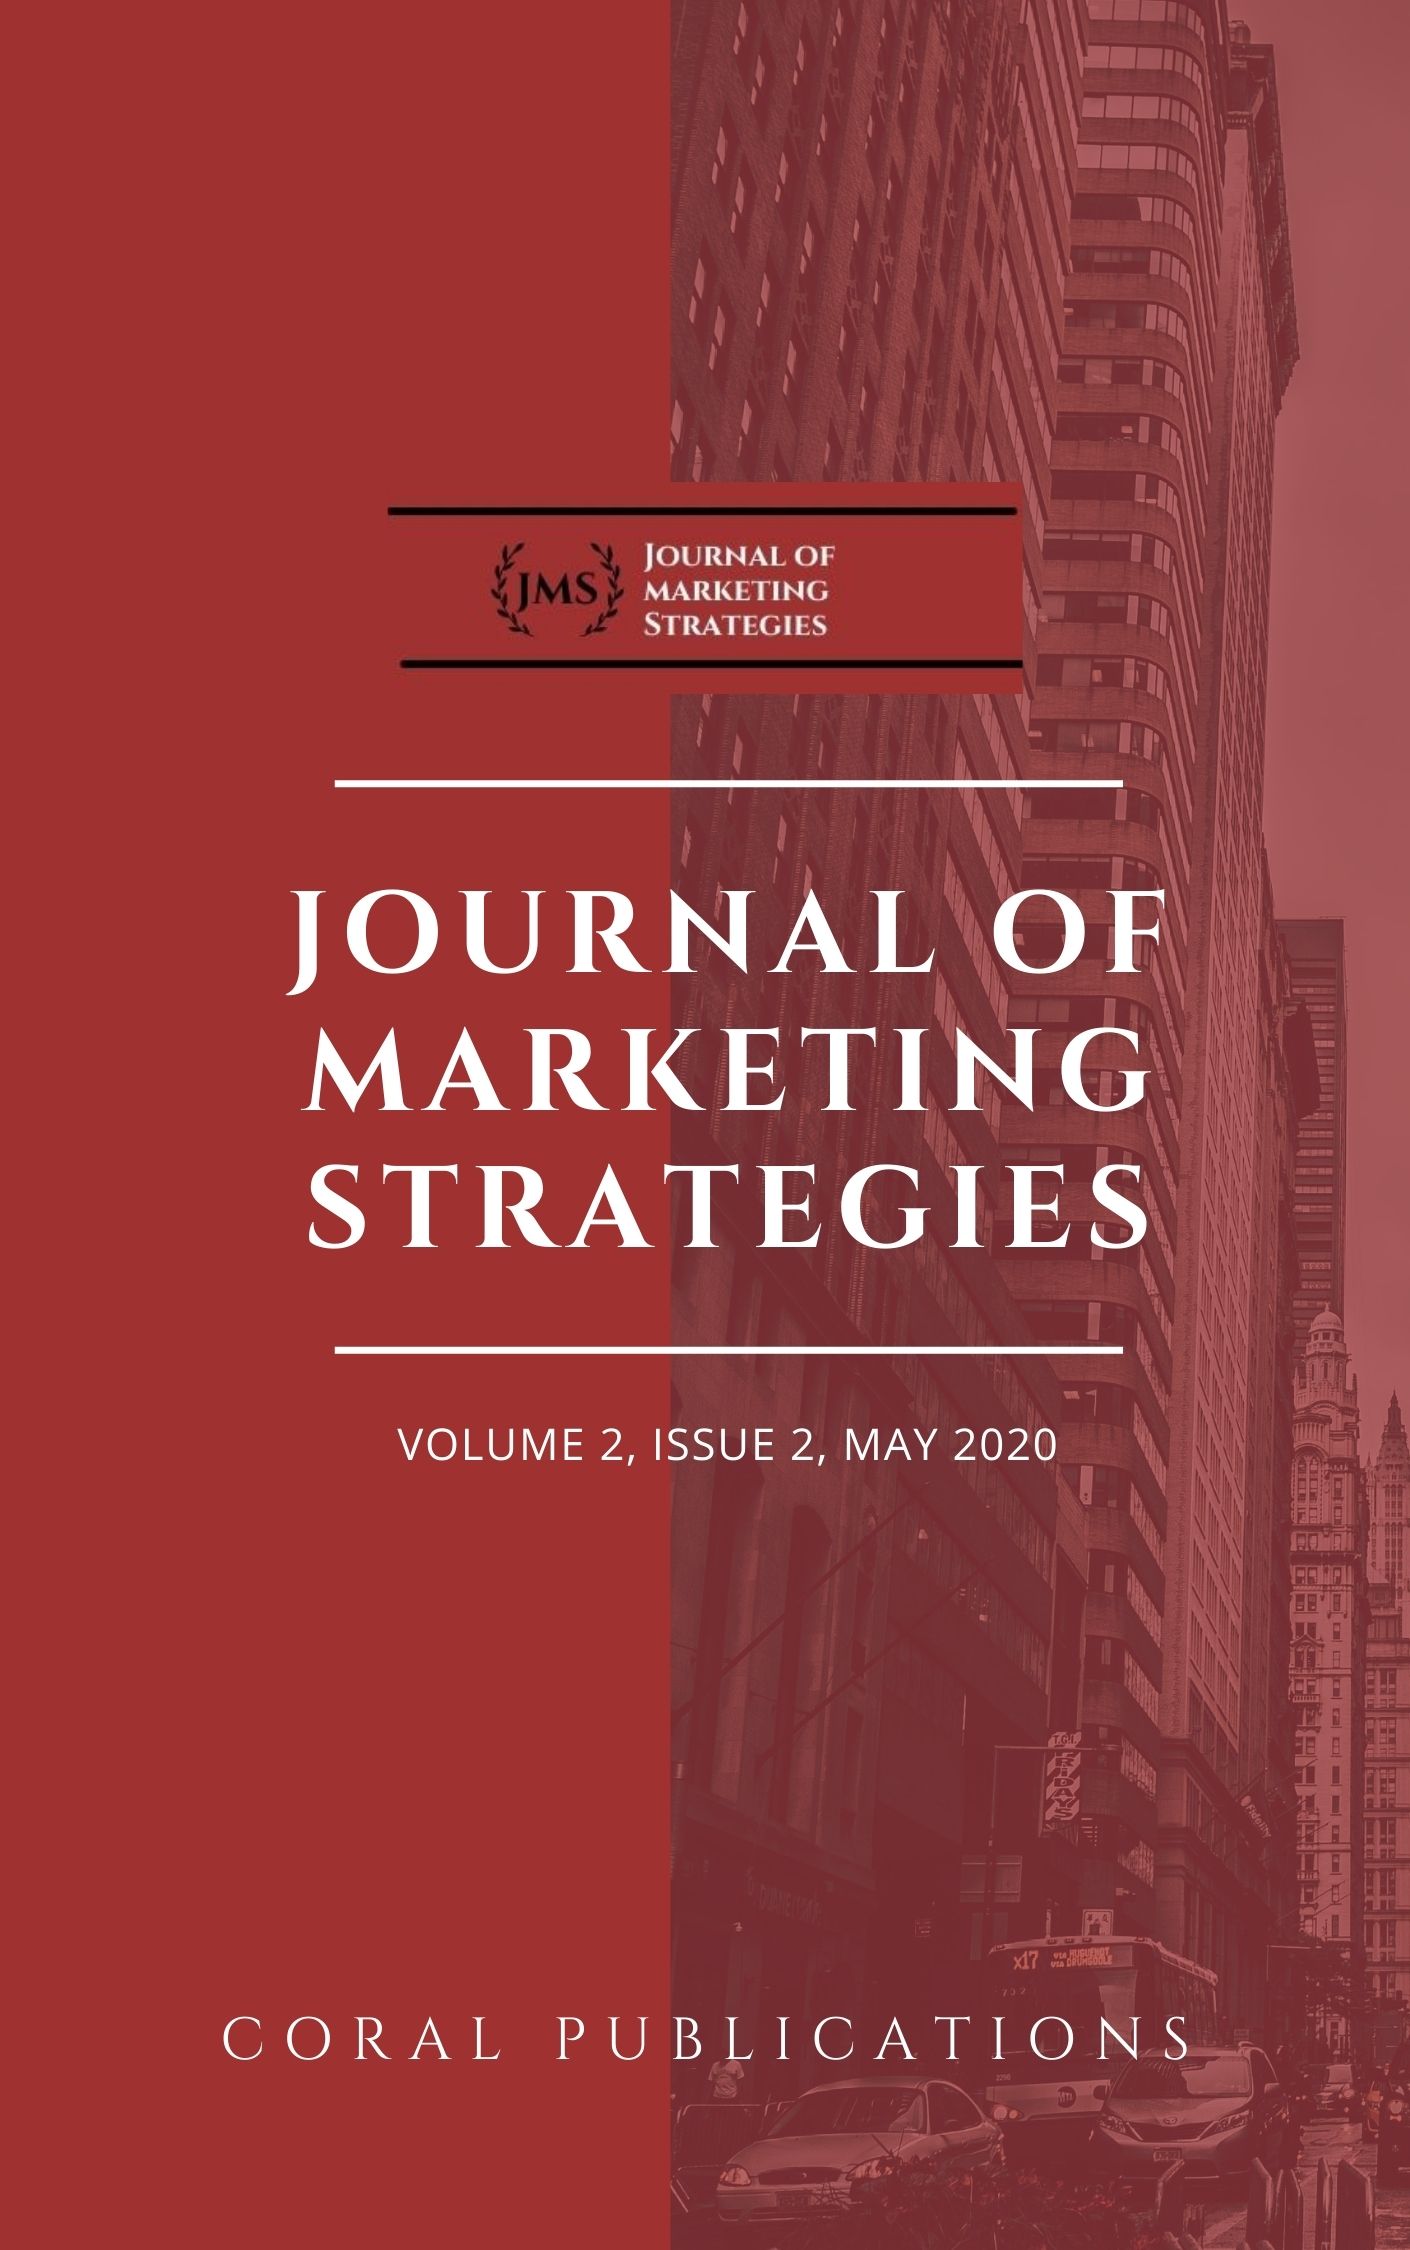 					View Vol. 2 No. 2 (2020): Journal of Marketing Strategies (Vol. 2, Issue 2) May 2020
				